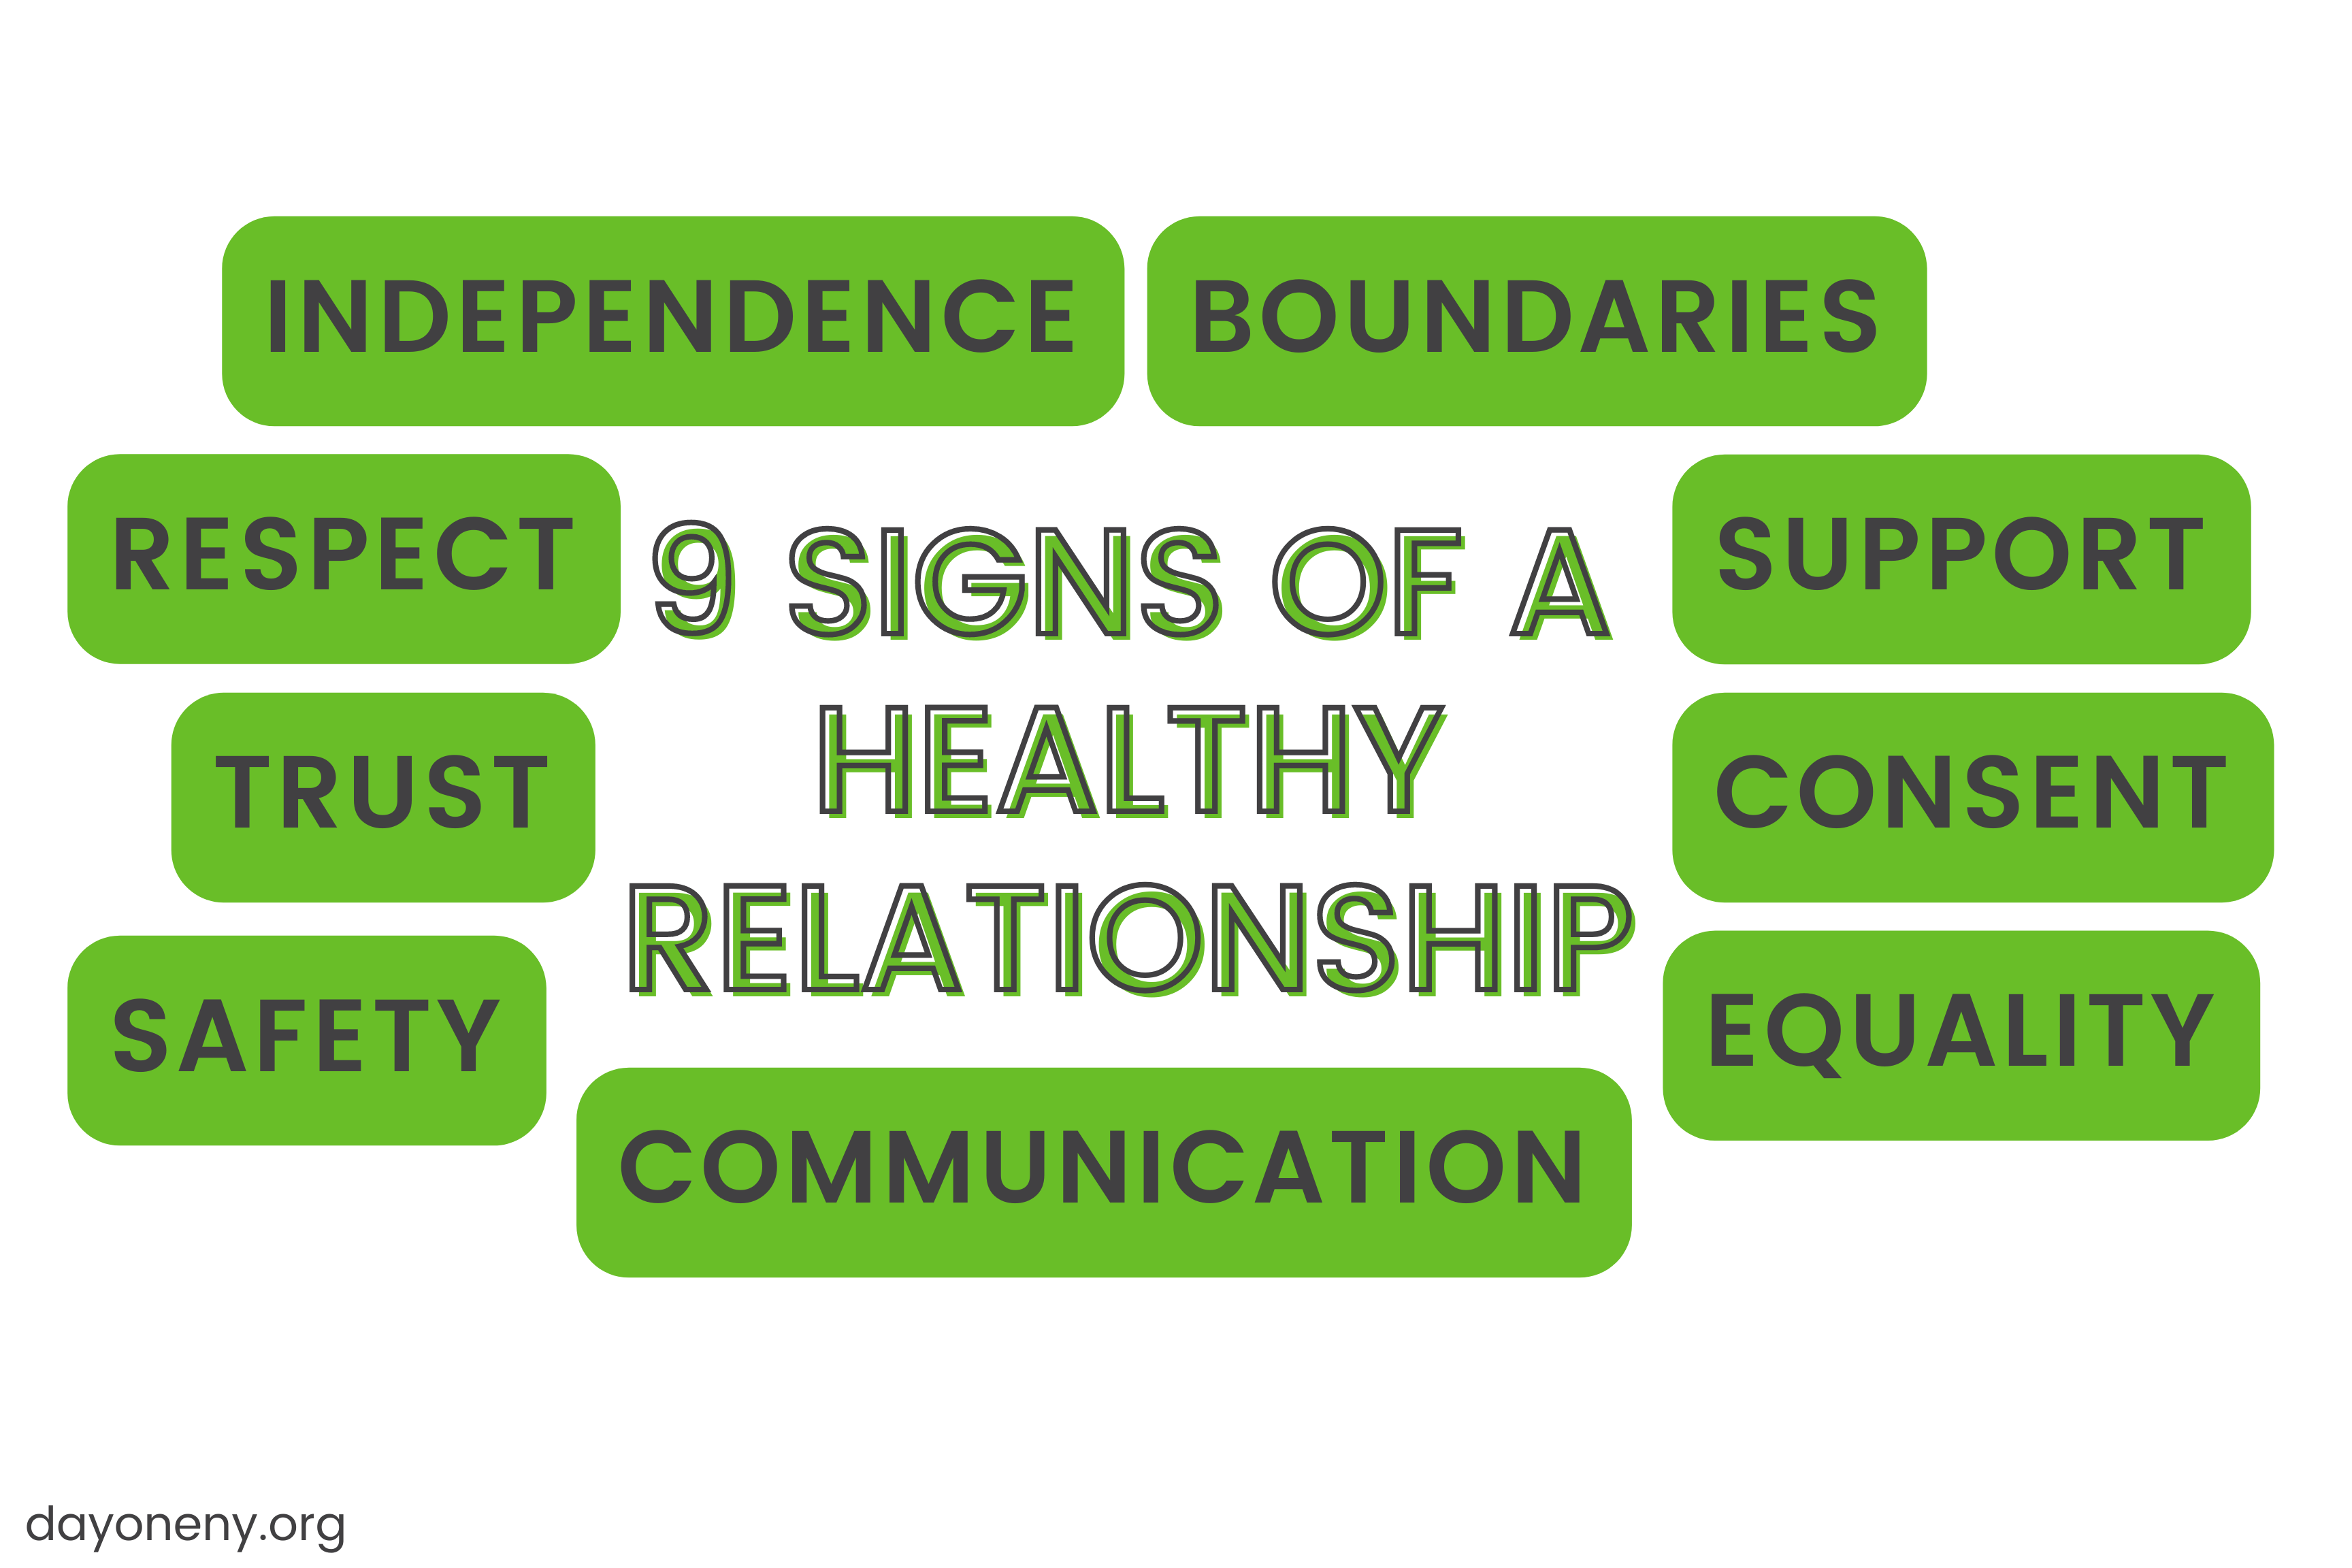 INDEPENDENCE BOUNDARIES.
[RESPECT 9 5iGNS OF A [SUPPORT
GE HEALTHY GE

RELATIONSHIP
ey

 

   

dayoneny.org